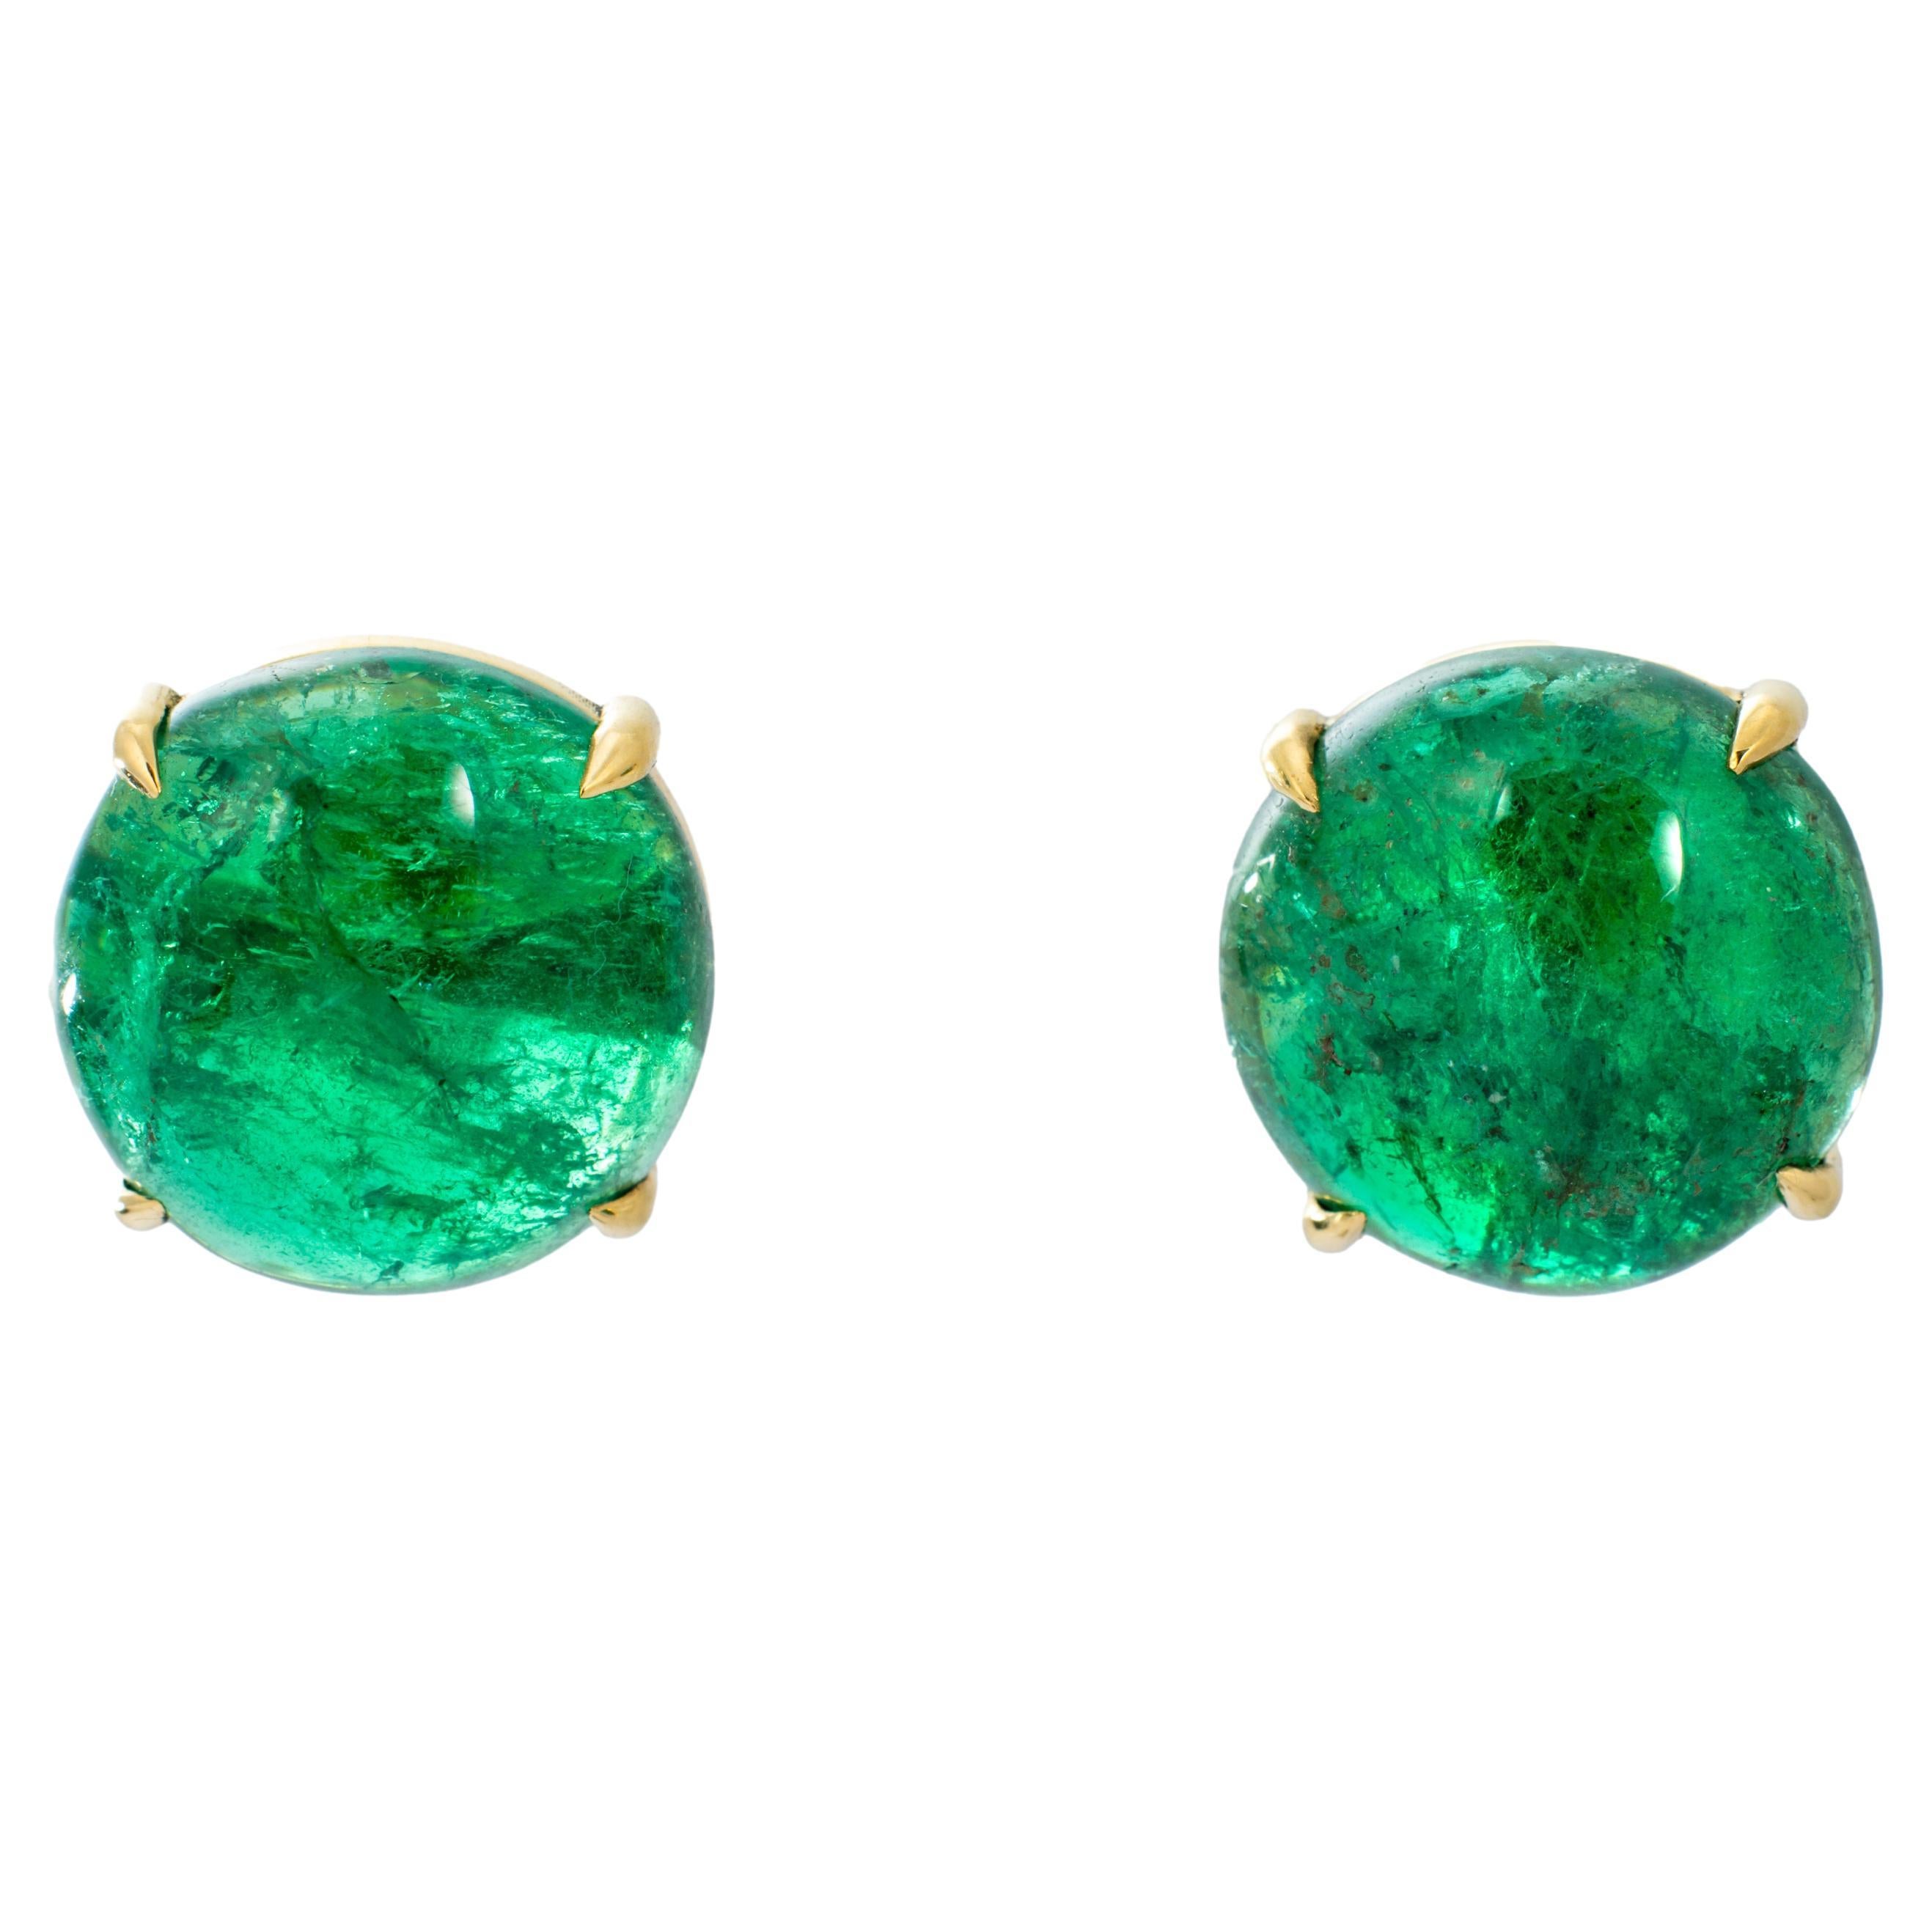 "Costis" Stud Earrings, with 15.83 carats round-cut Zambian Emeralds